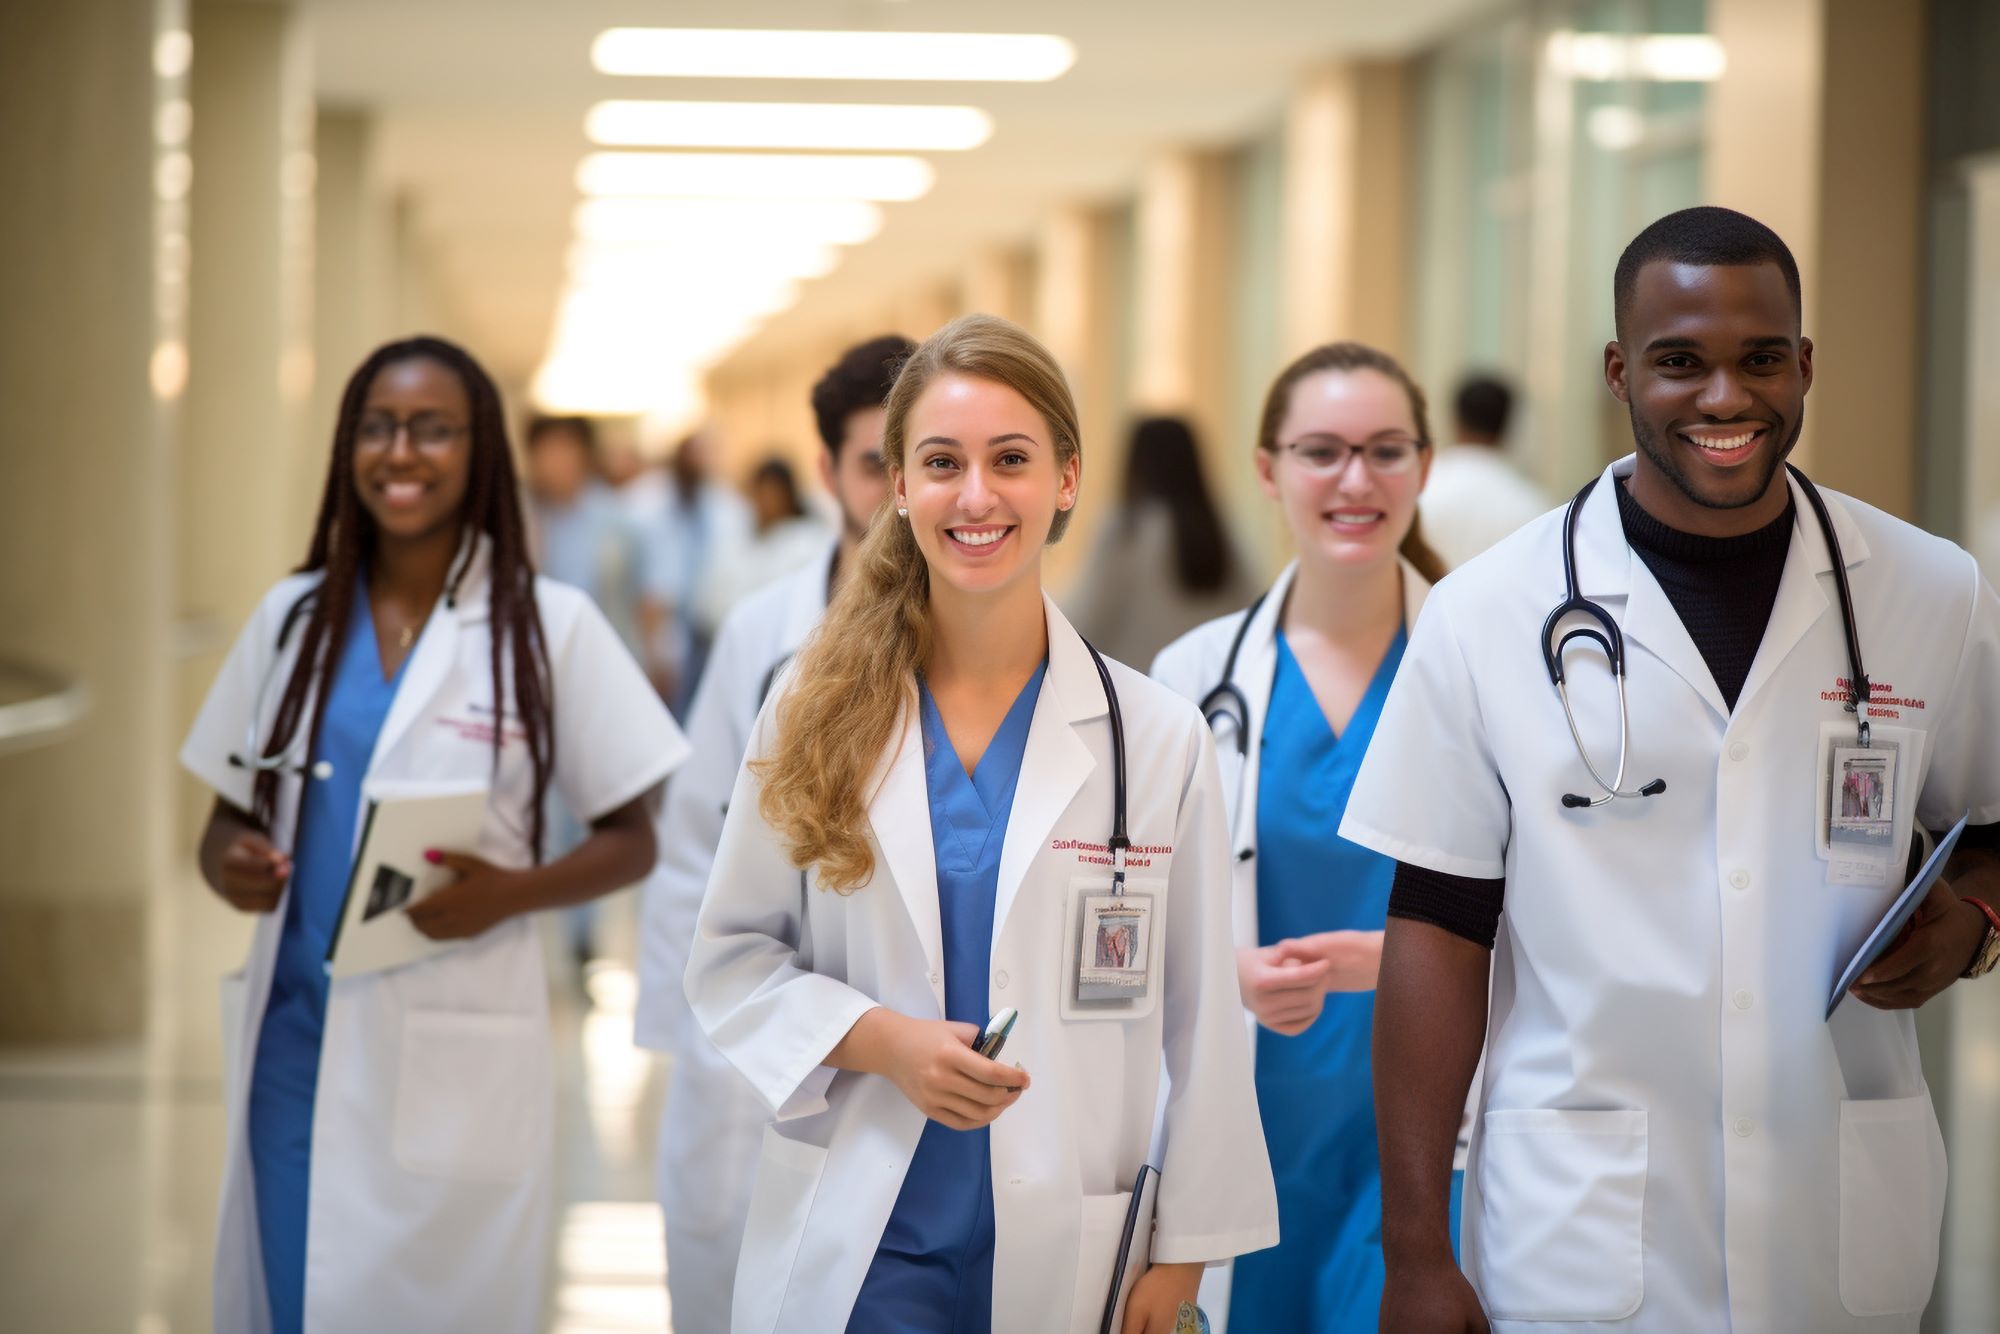 A group of doctors in white coats smile and walk down a hallway